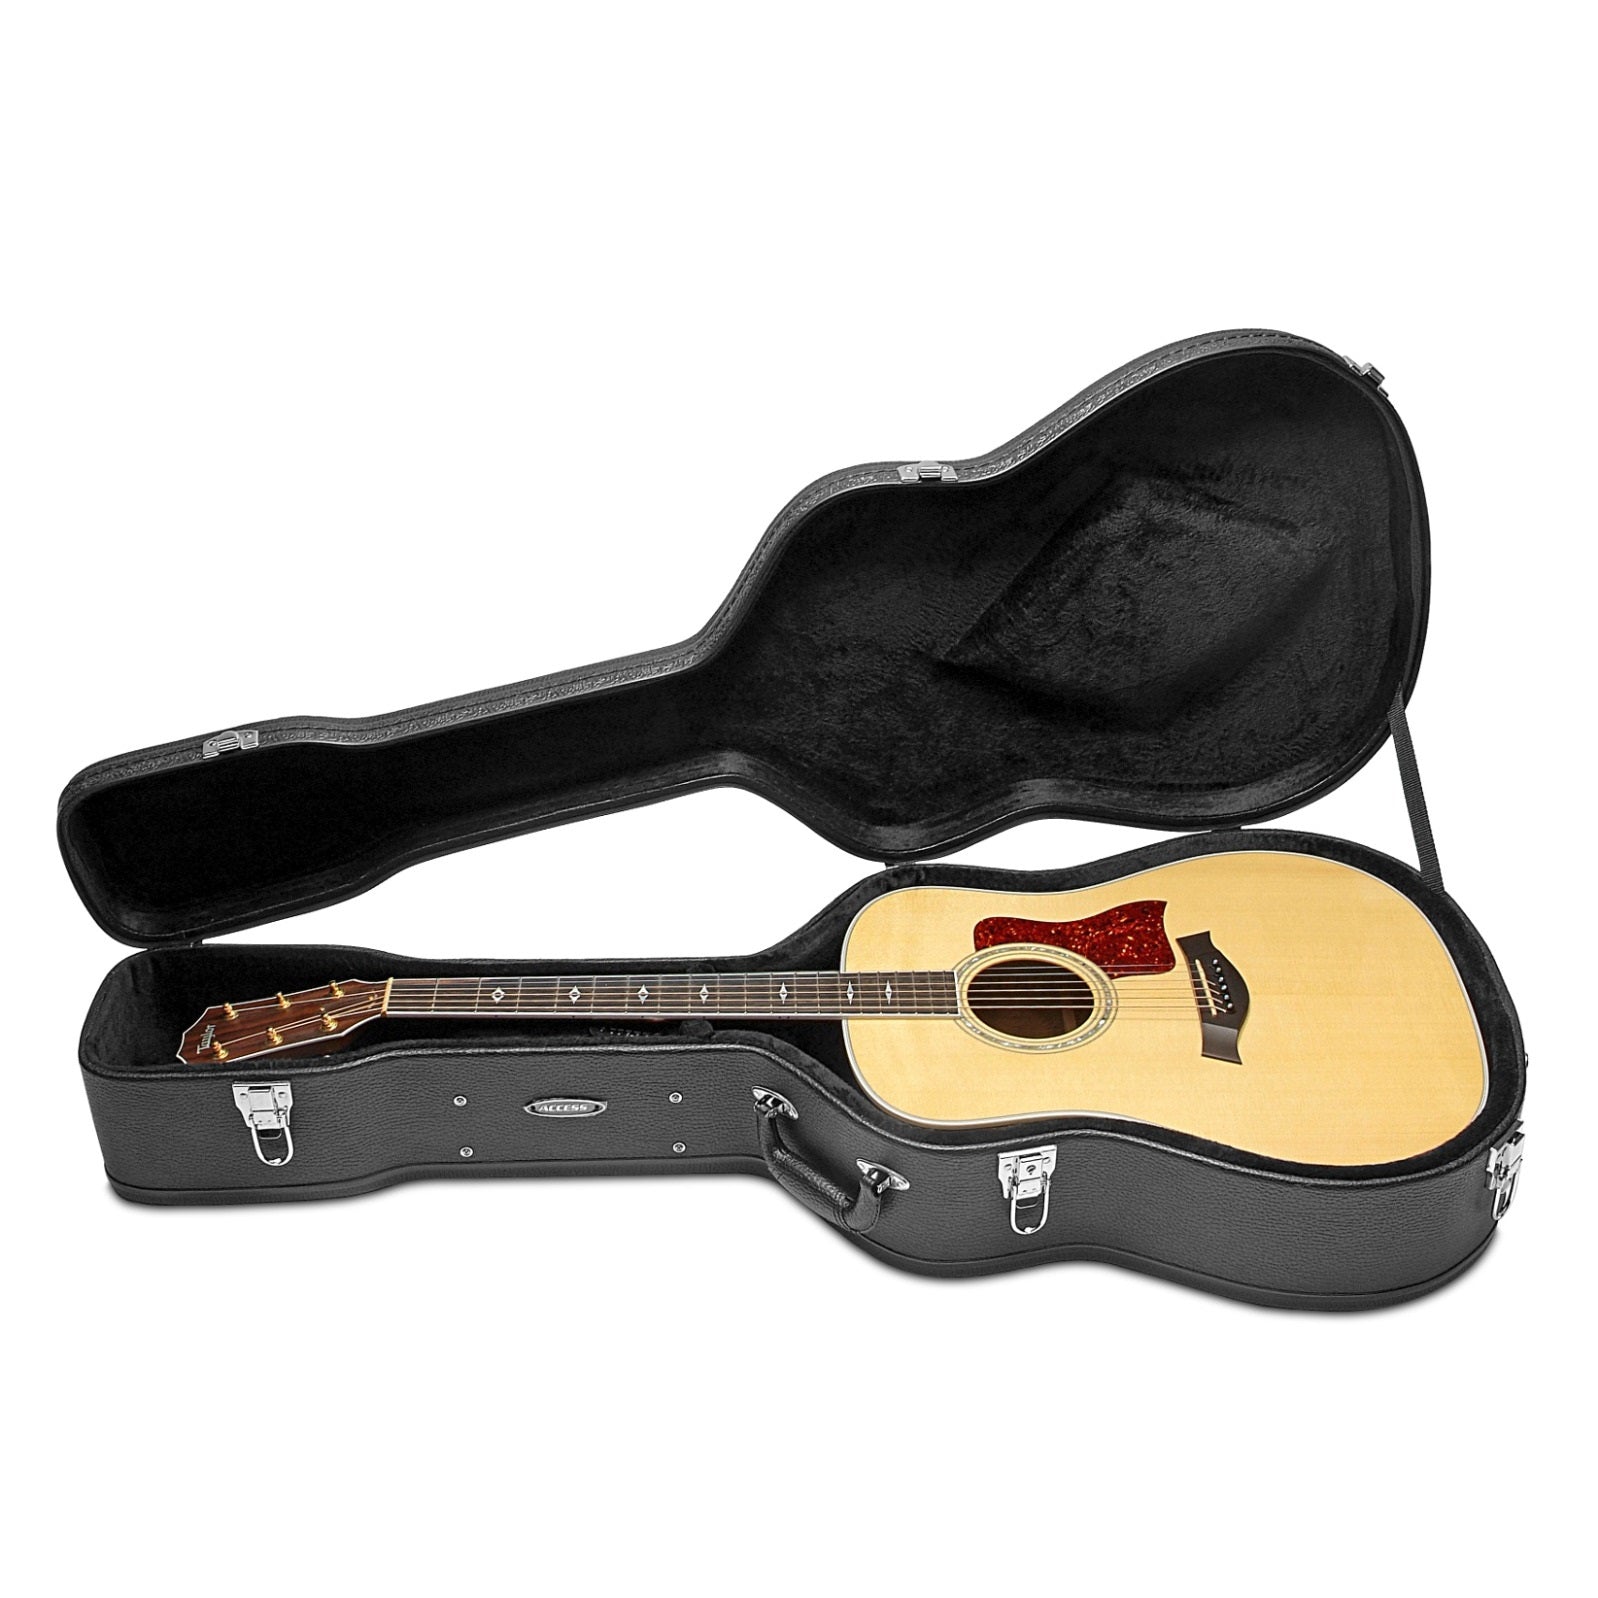 Access, Access Stage One Acoustic Guitar Case, Dreadnought